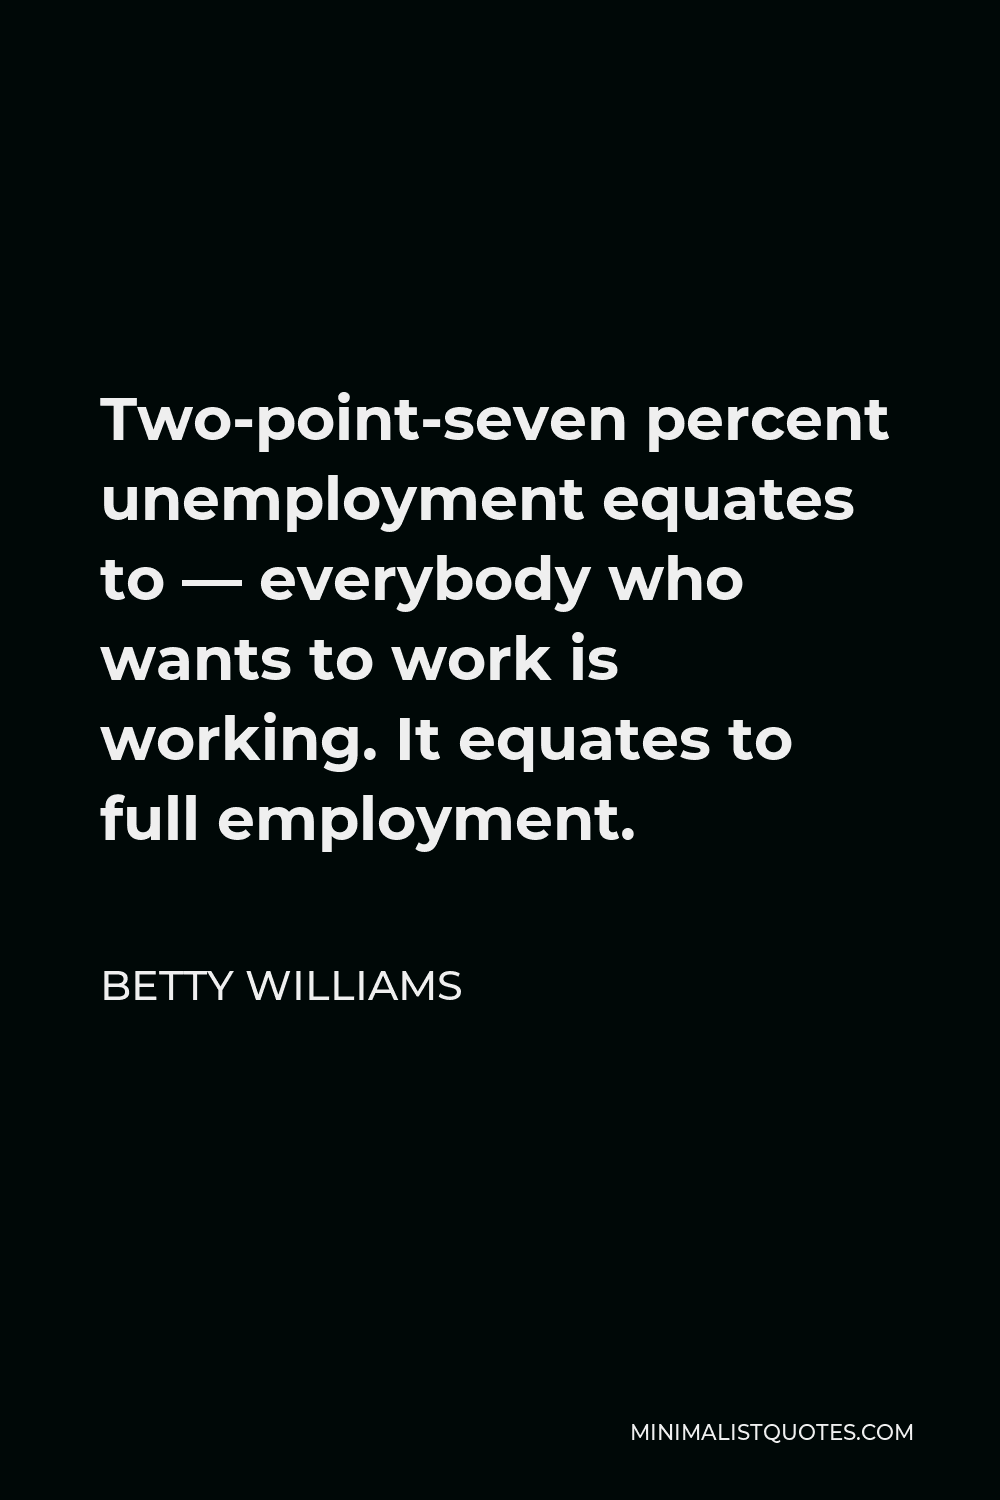 Betty Williams Quote - Two-point-seven percent unemployment equates to — everybody who wants to work is working. It equates to full employment.